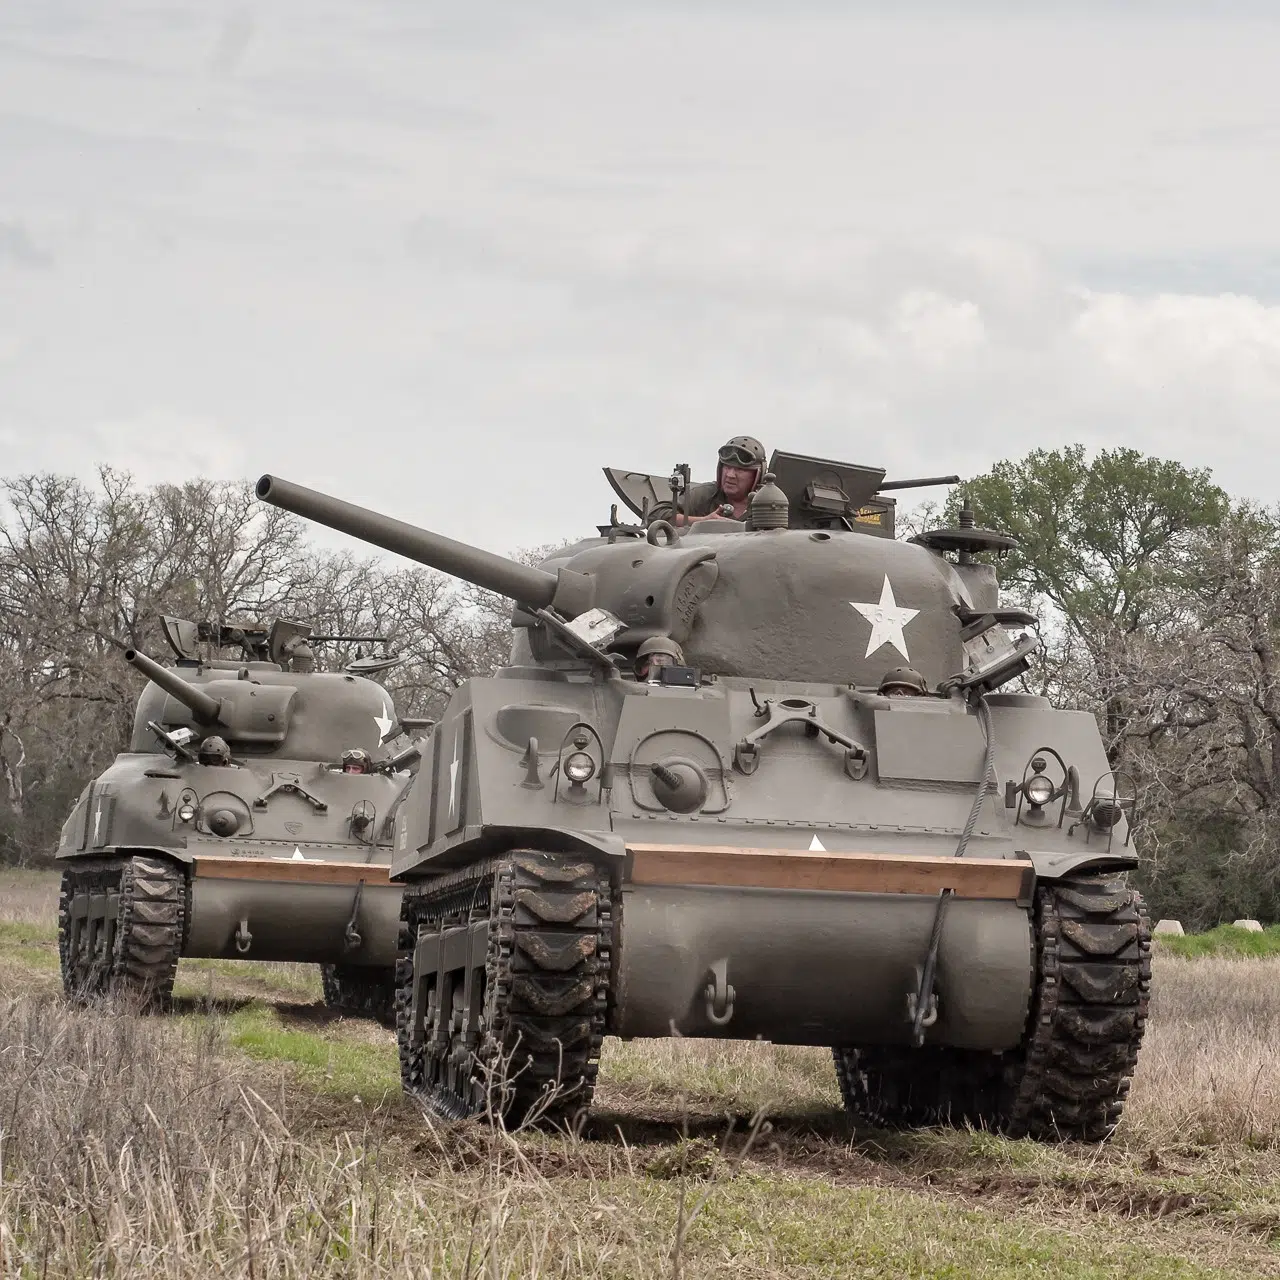 Museum of the American G.I in College Station, Texas - Image of Two Shermans